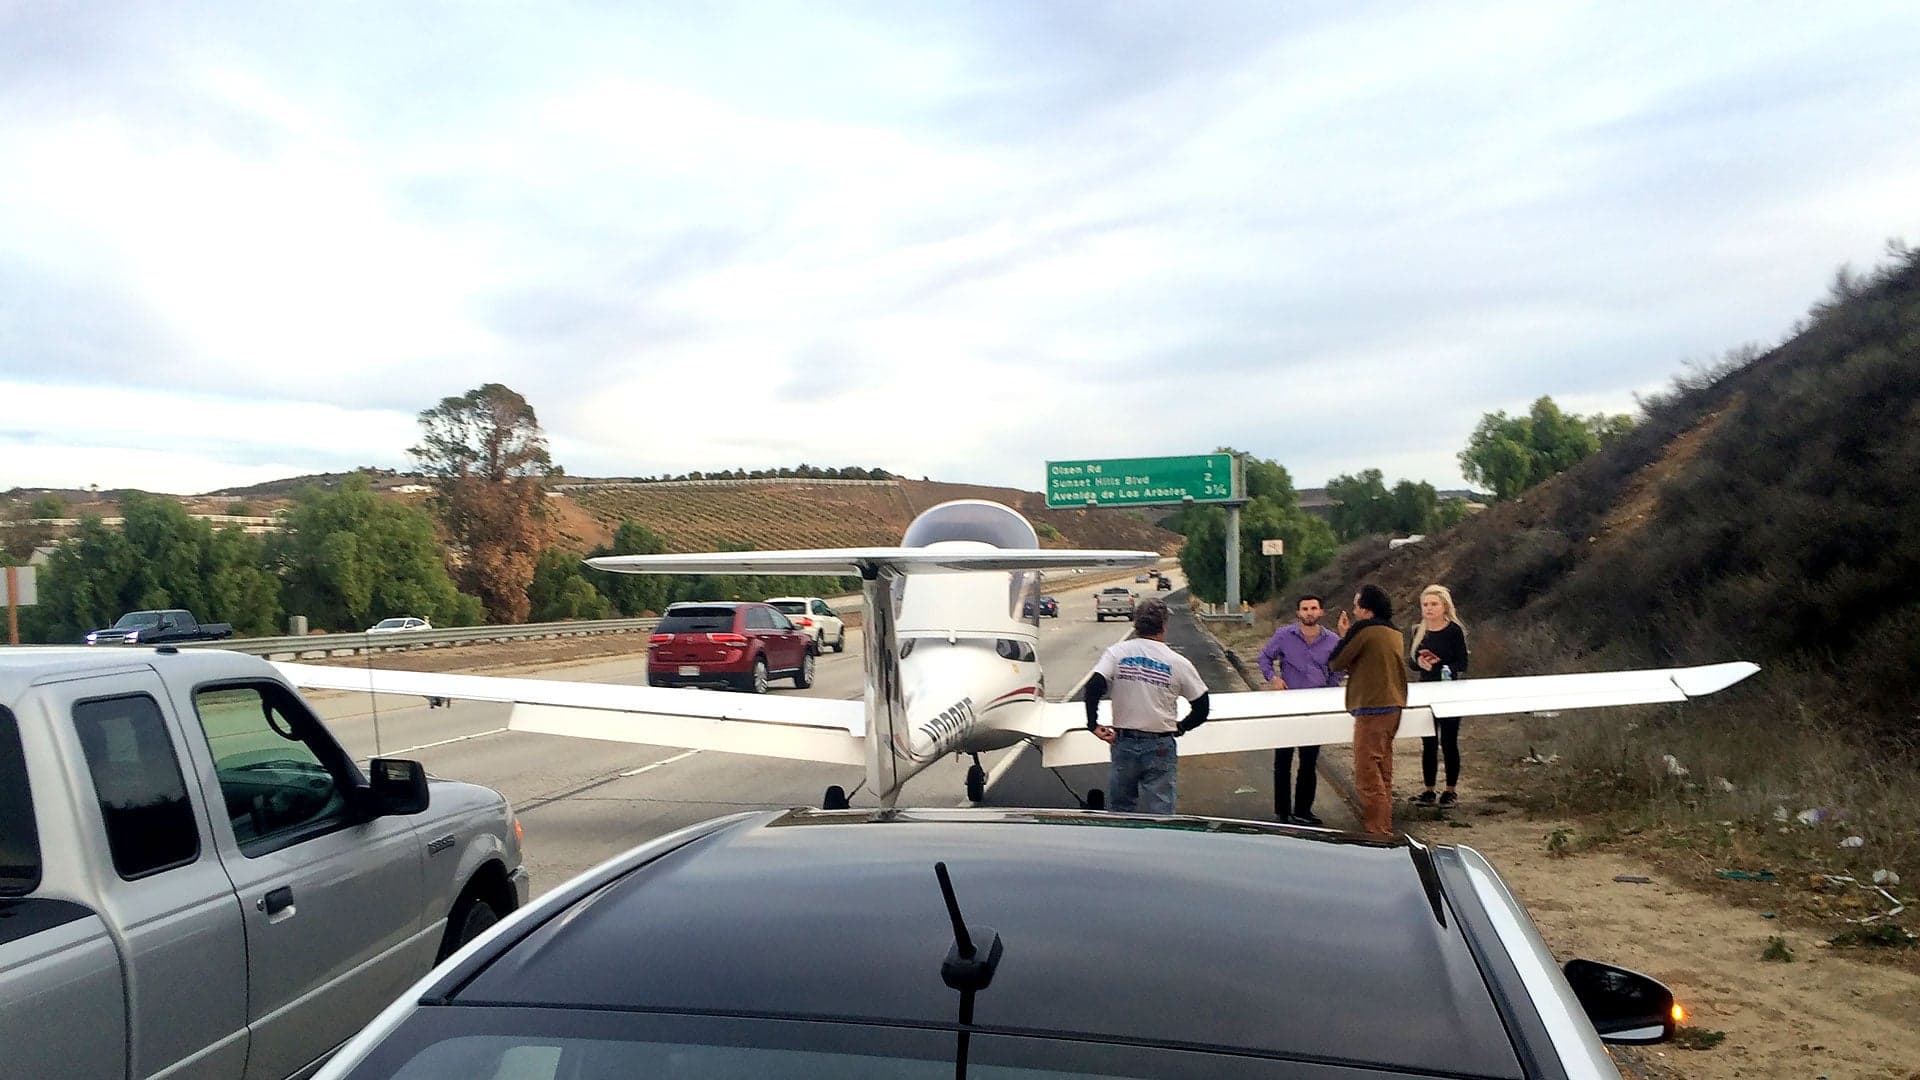 What Happens When a Plane Lands in Front of You? Ask The Drive